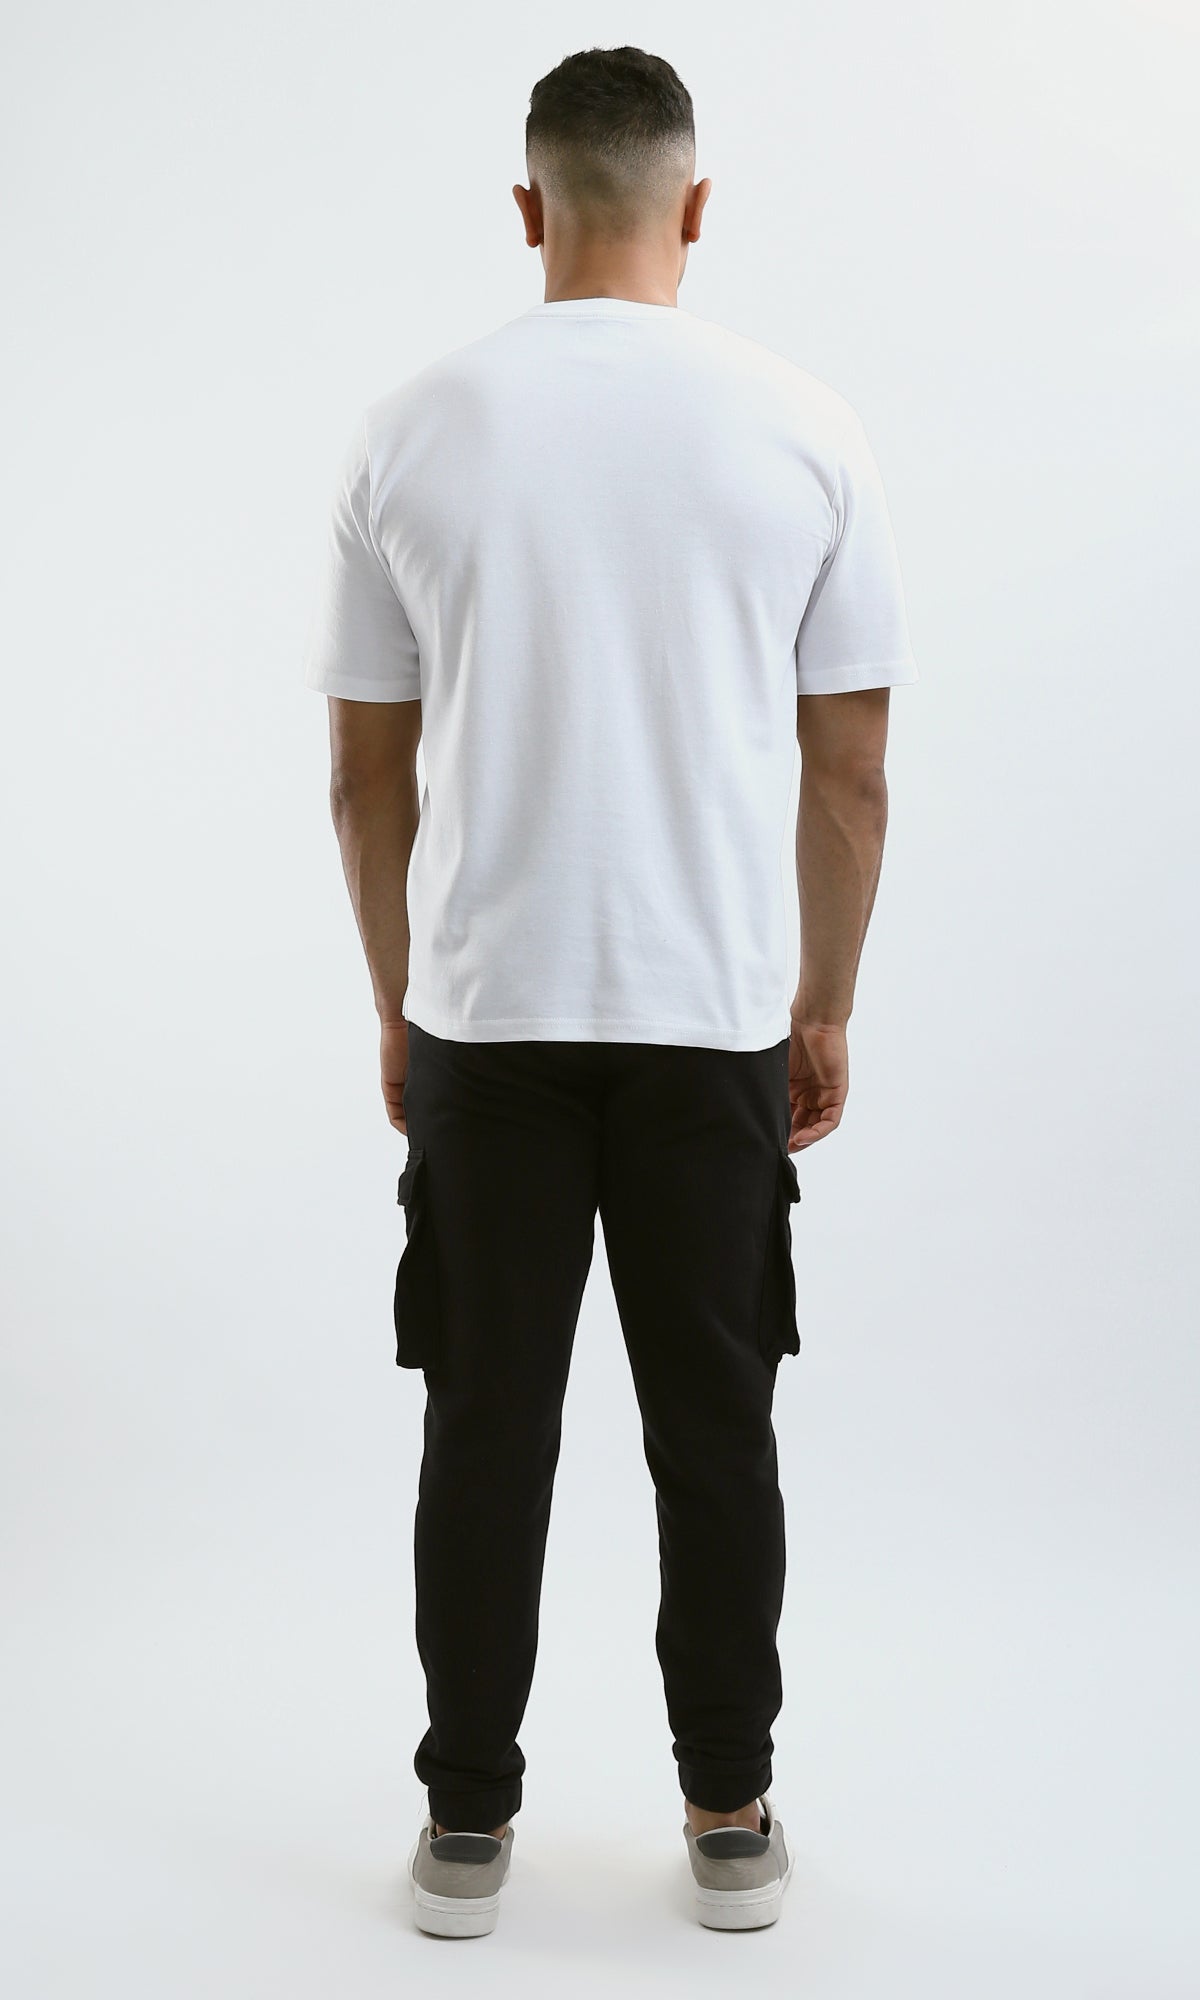 O190113 Fashionable White Tee With Front Pocket